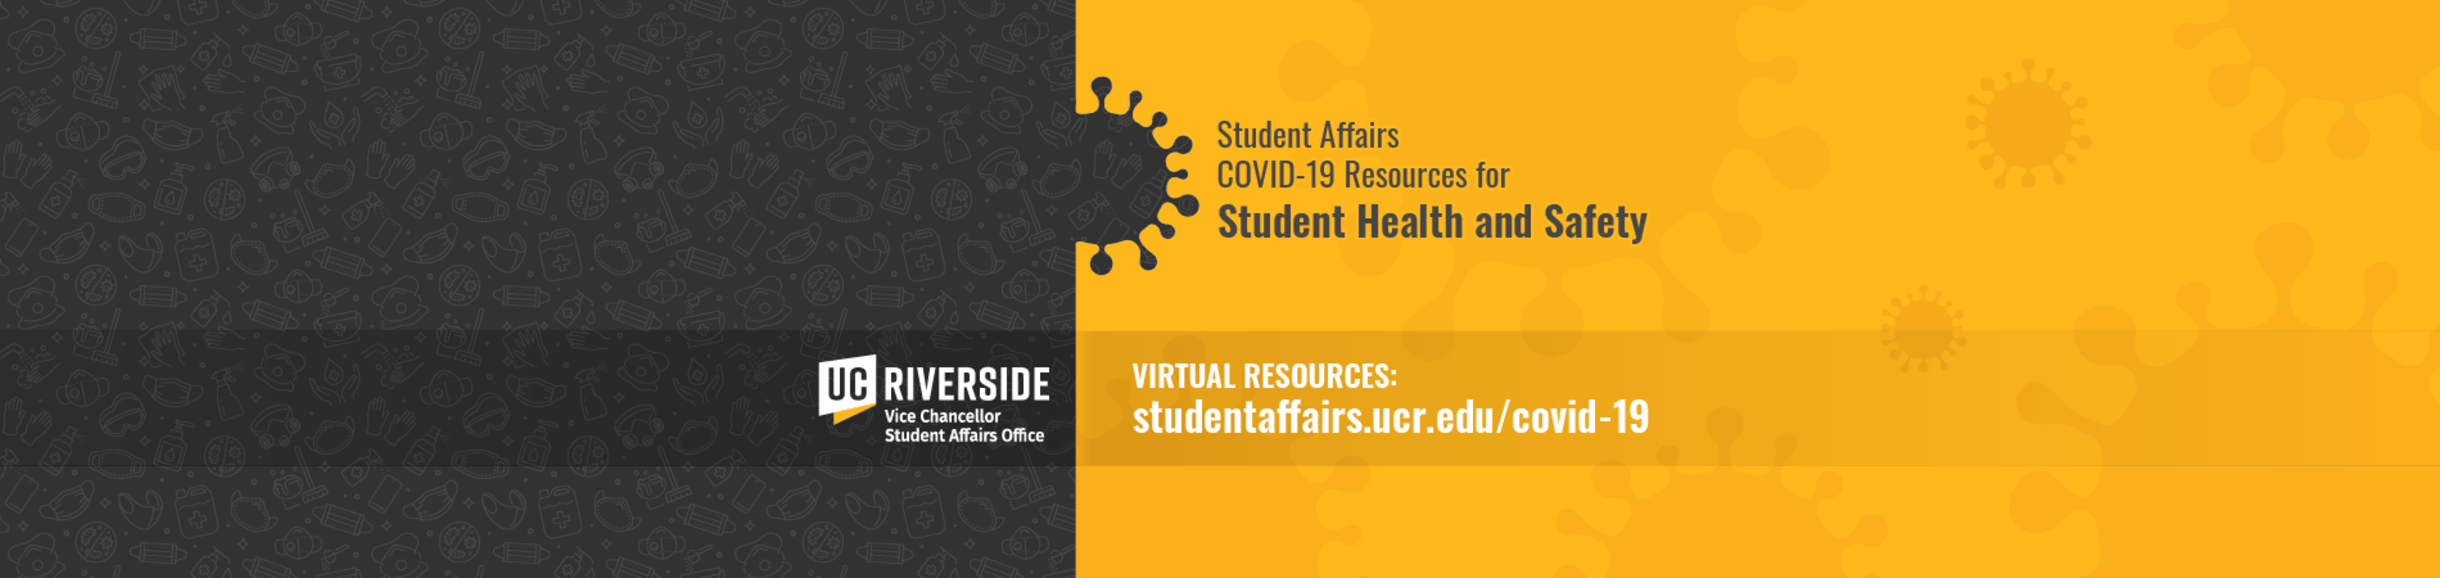 Student Affairs COVID-19 Resources for Student Health and Safety